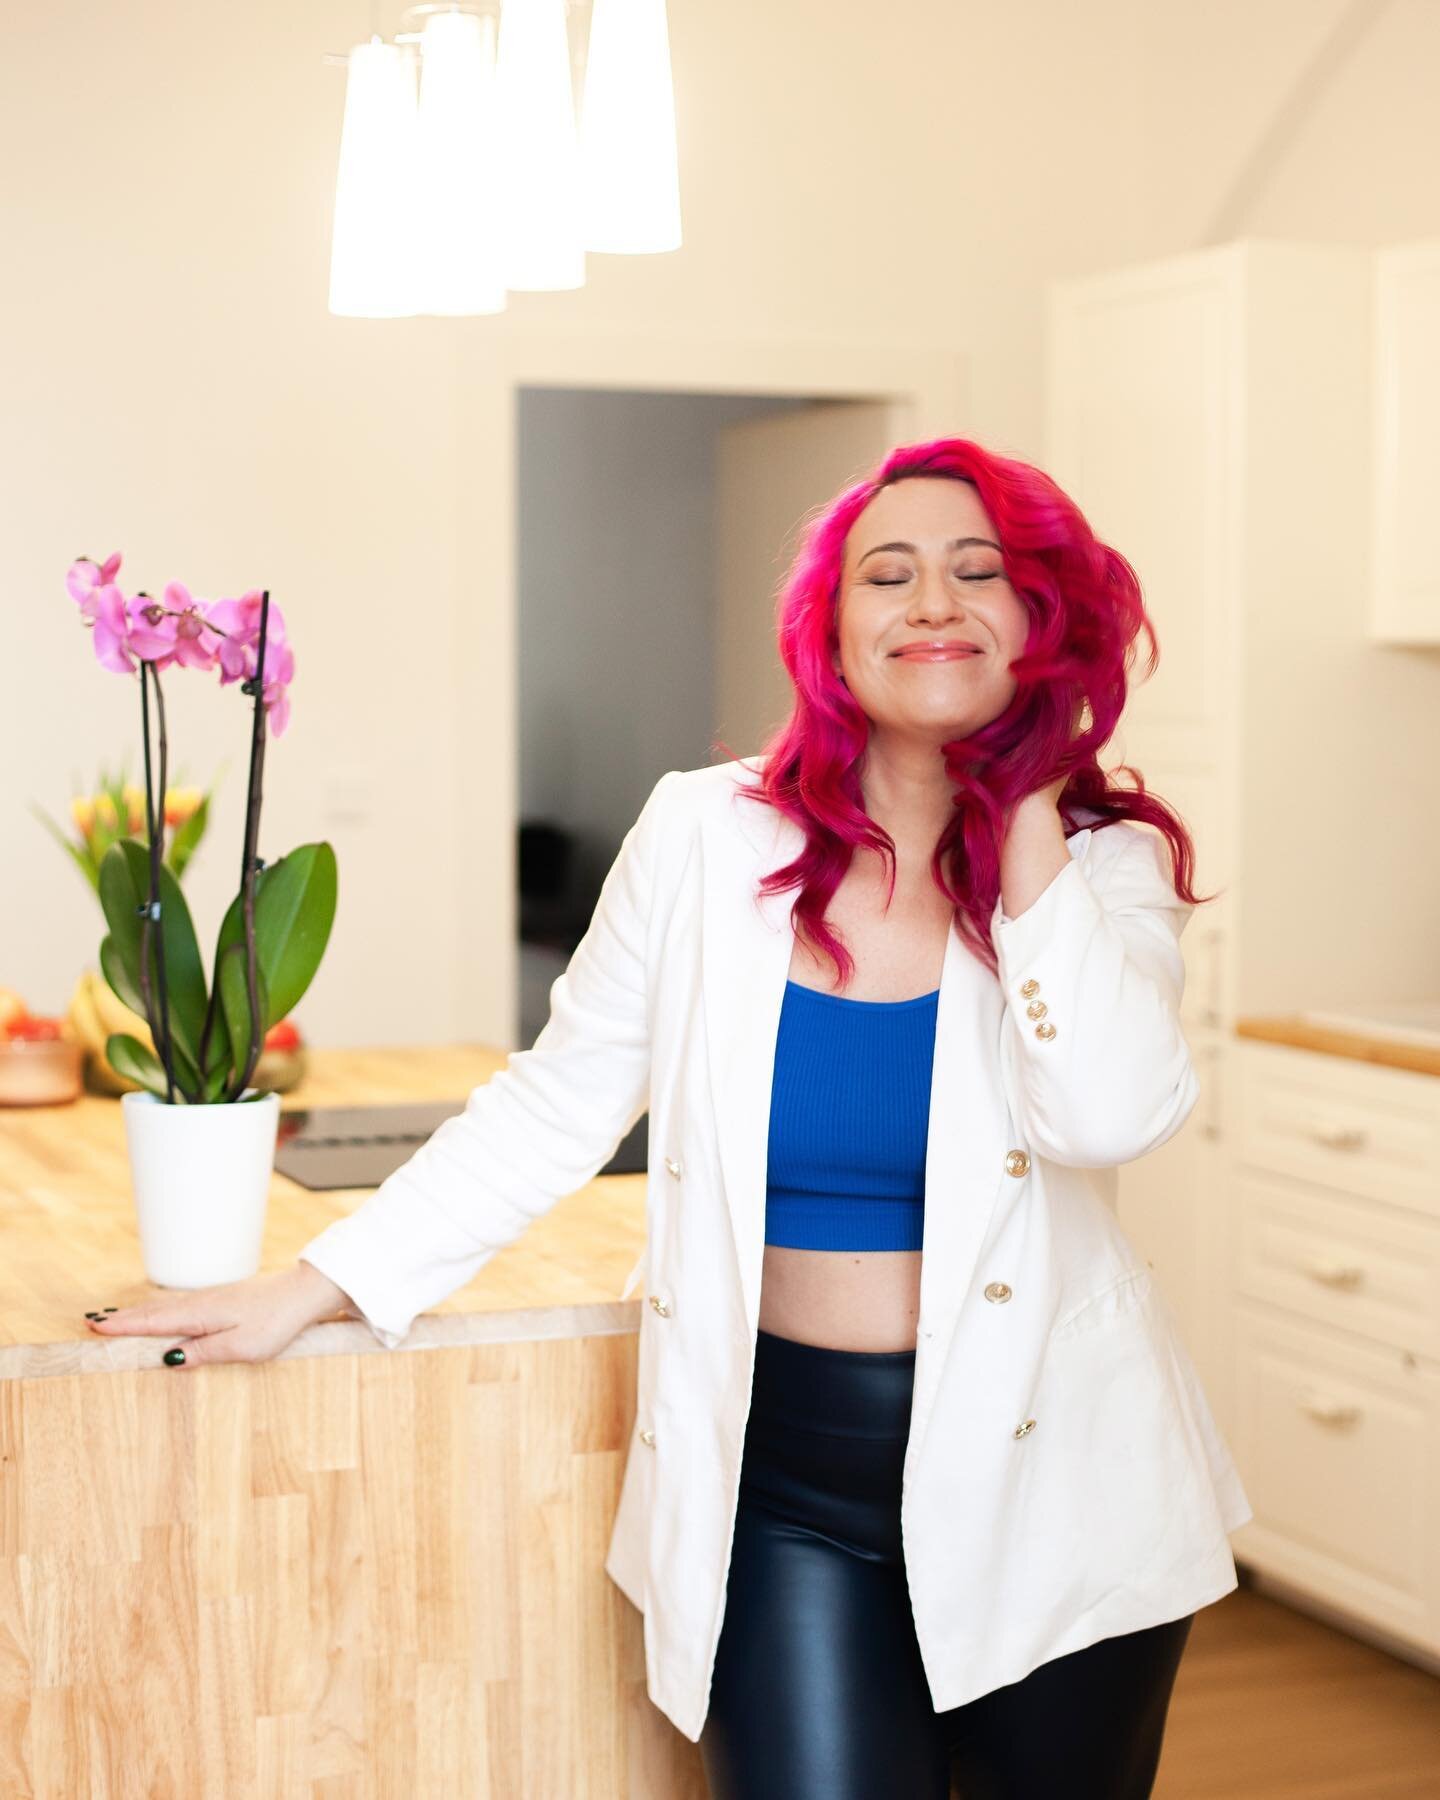 Reintroducing myself on IG to share a glimpse into my journey.

I'm Mariko, former 'Pink Hair Chef' from Los Angeles. My recipes were everywhere from @perezhilton to @forbes and my celebrity clientele included @jaredleto @diddy @davidlynchfoundation.